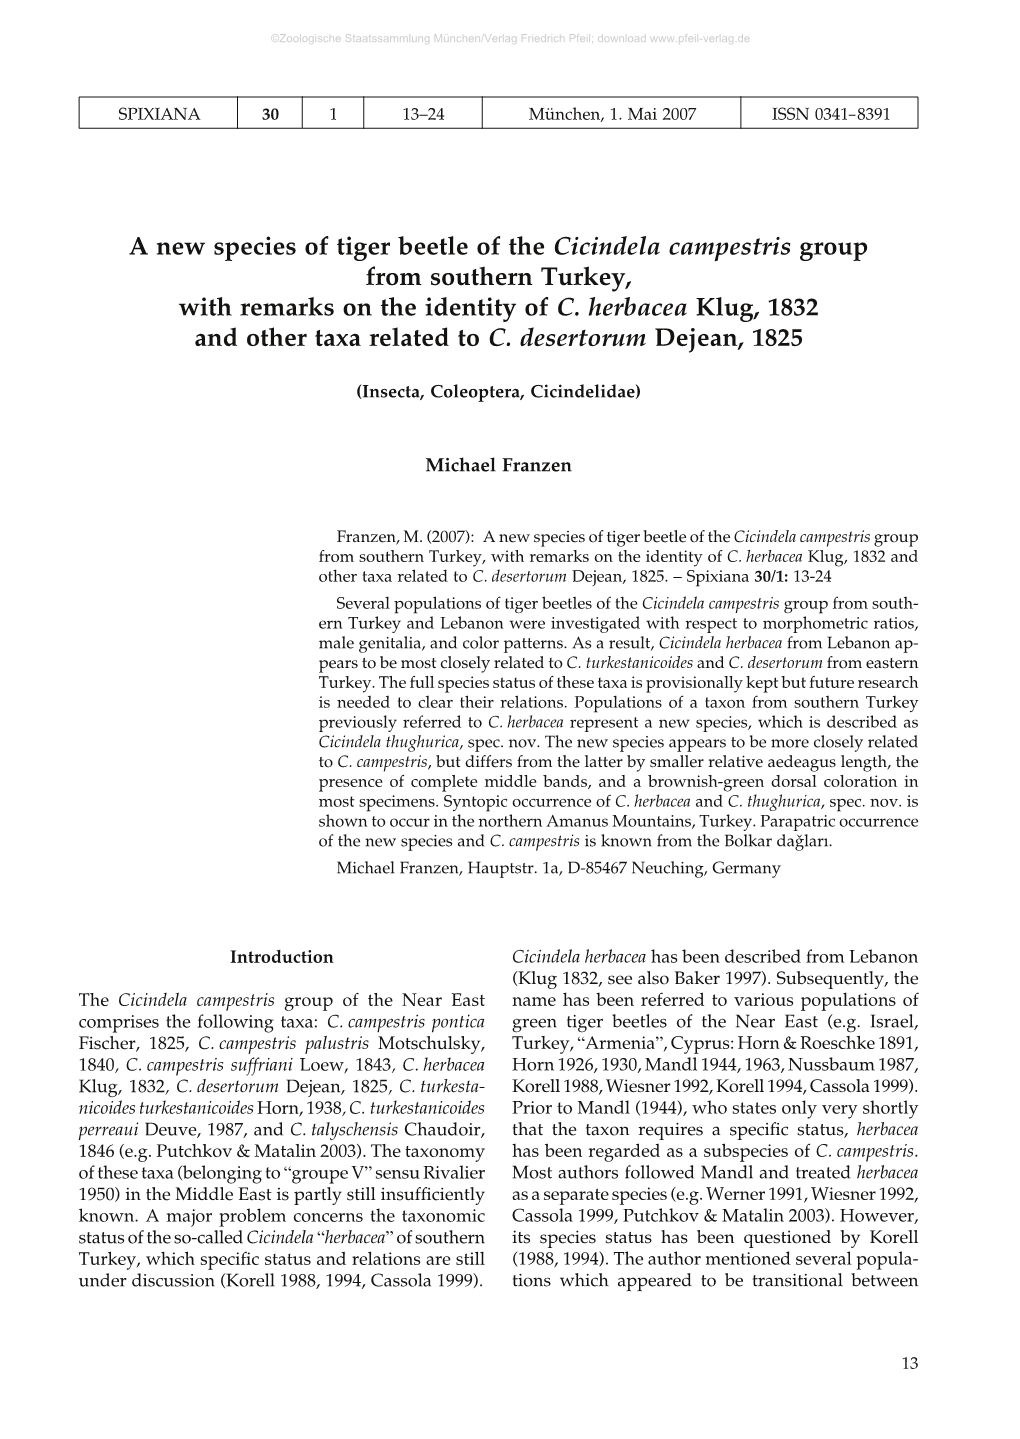 A New Species of Tiger Beetle of the Cicindela Campestris Group from Southern Turkey, with Remarks on the Identity of C